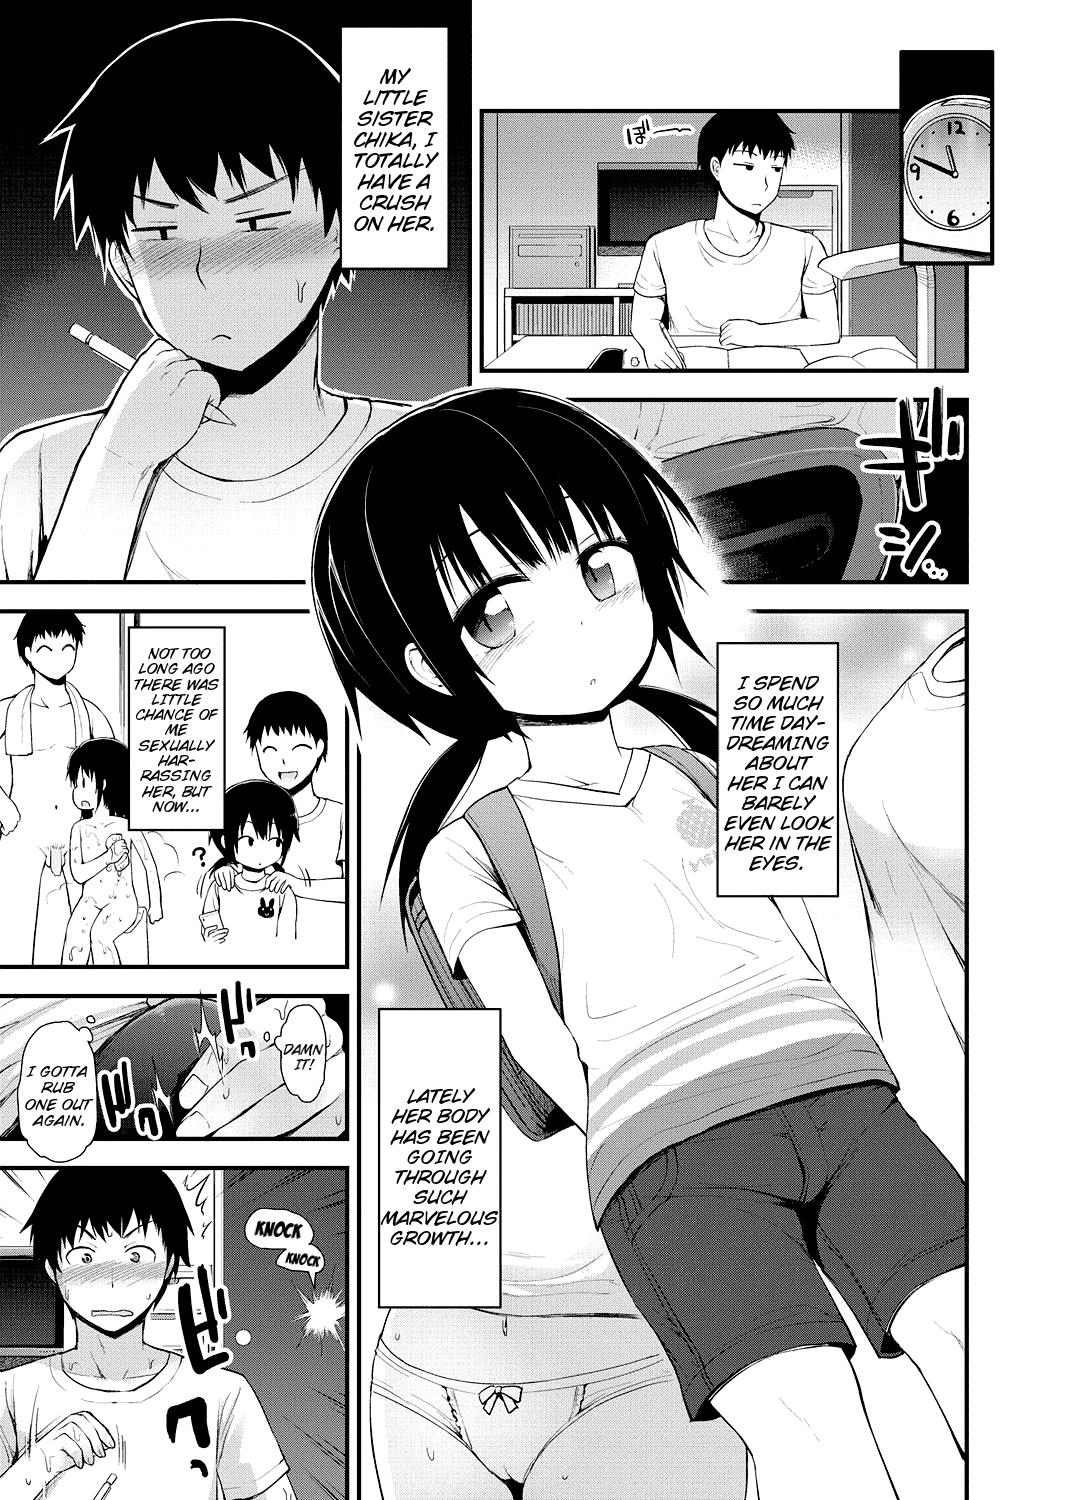 Sperm Imouto ga Ichiban Kawaii | Little Sister Is The Cutest Doggystyle - Page 3